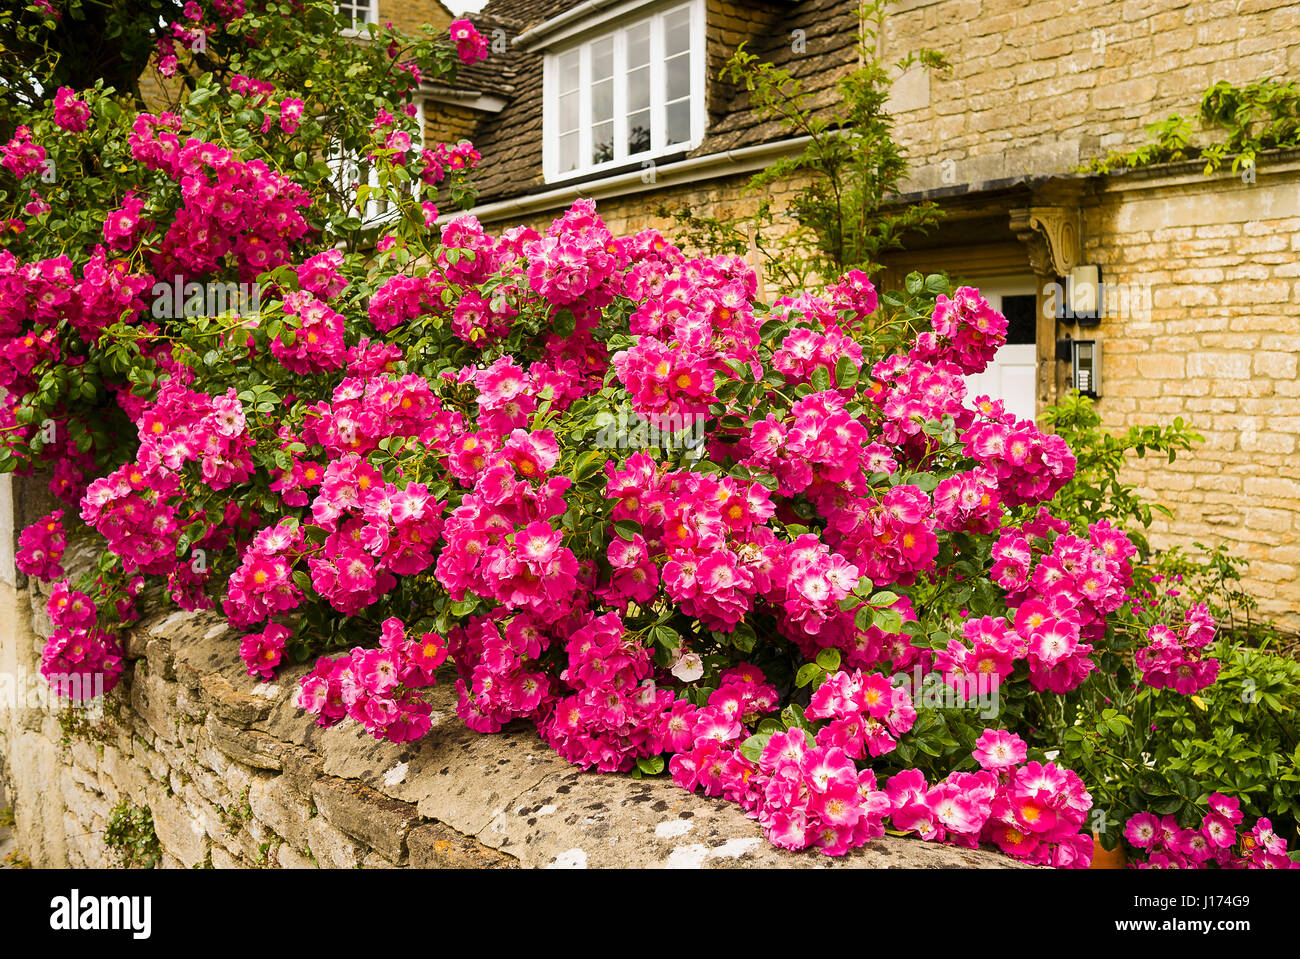 A cascading display of a pink rambling rose {probably R. American Pillar) festooned on the front garden wall in Melksham town. Stock Photo